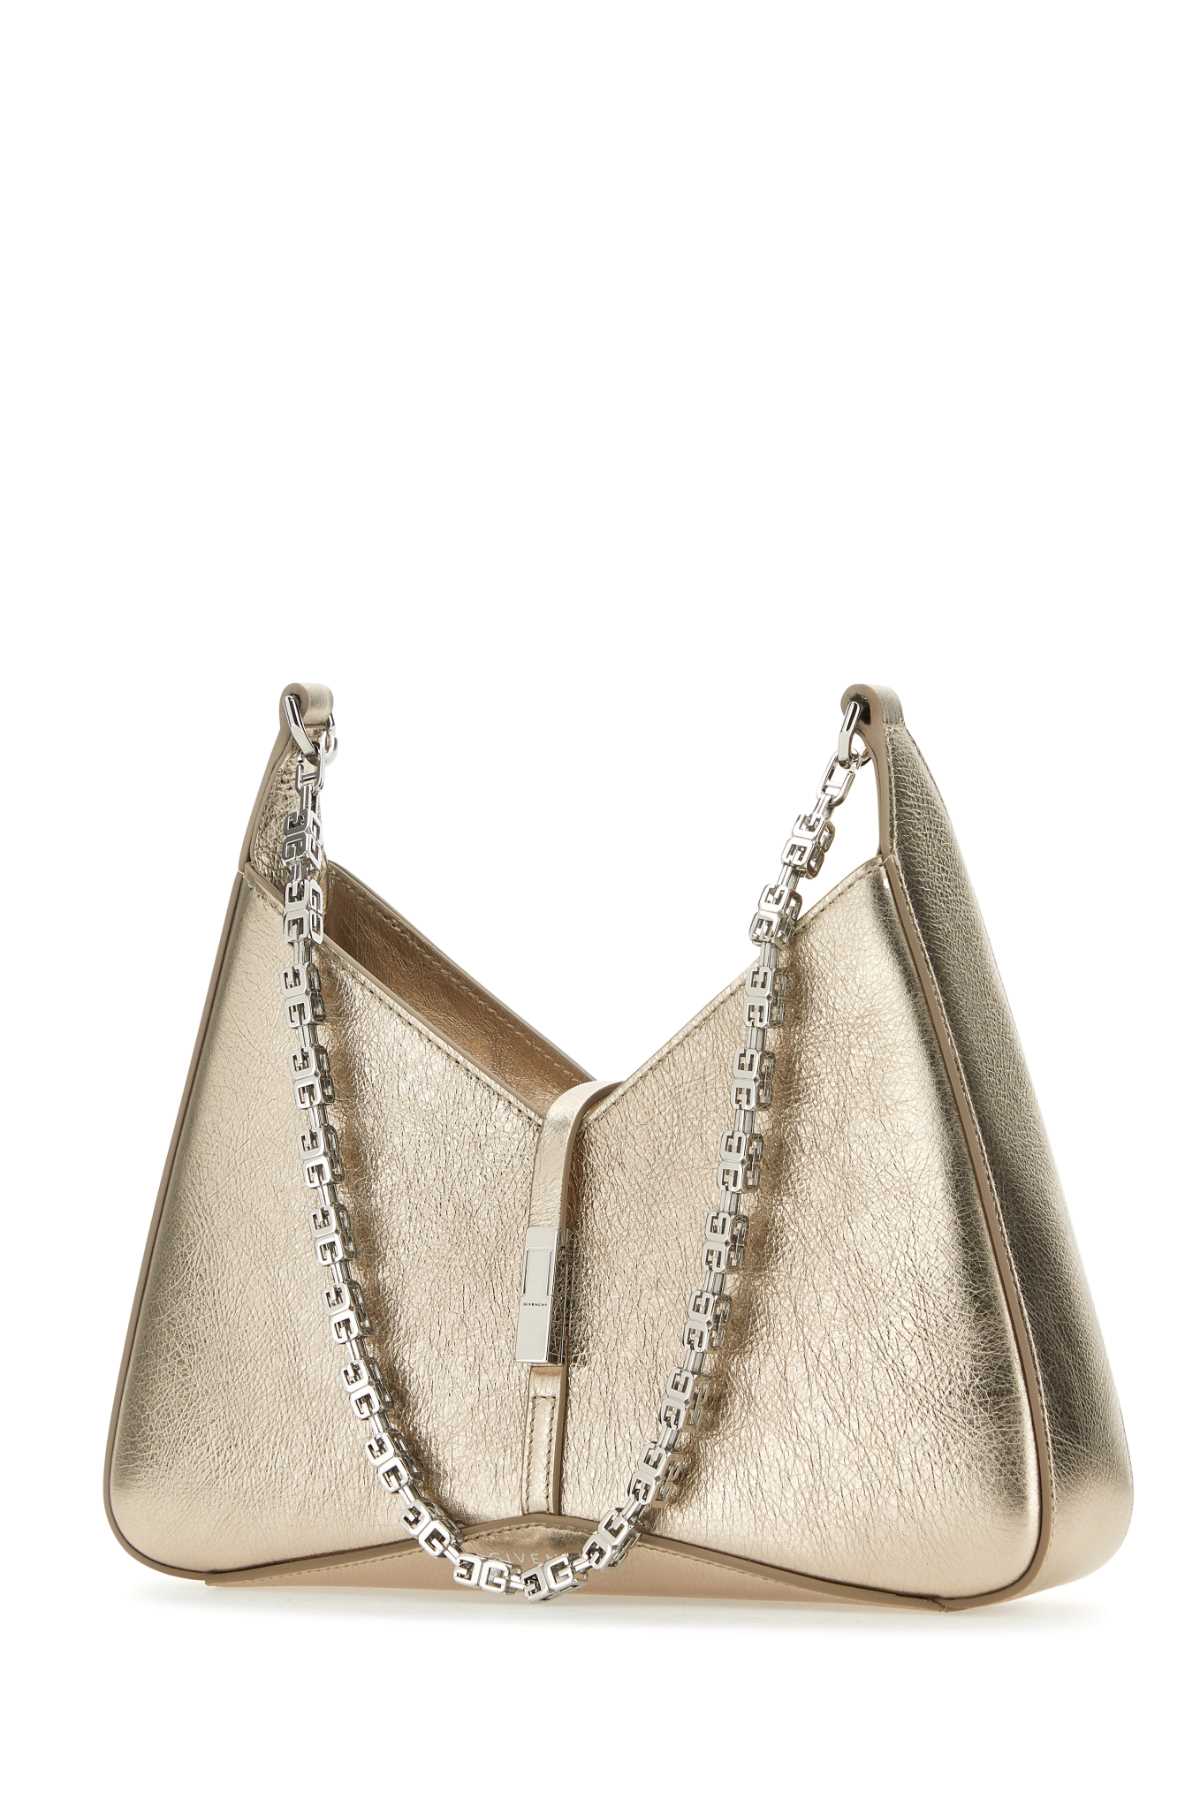 Givenchy Golden Rose Leather Small Cut-out Shoulder Bag In Dustygold